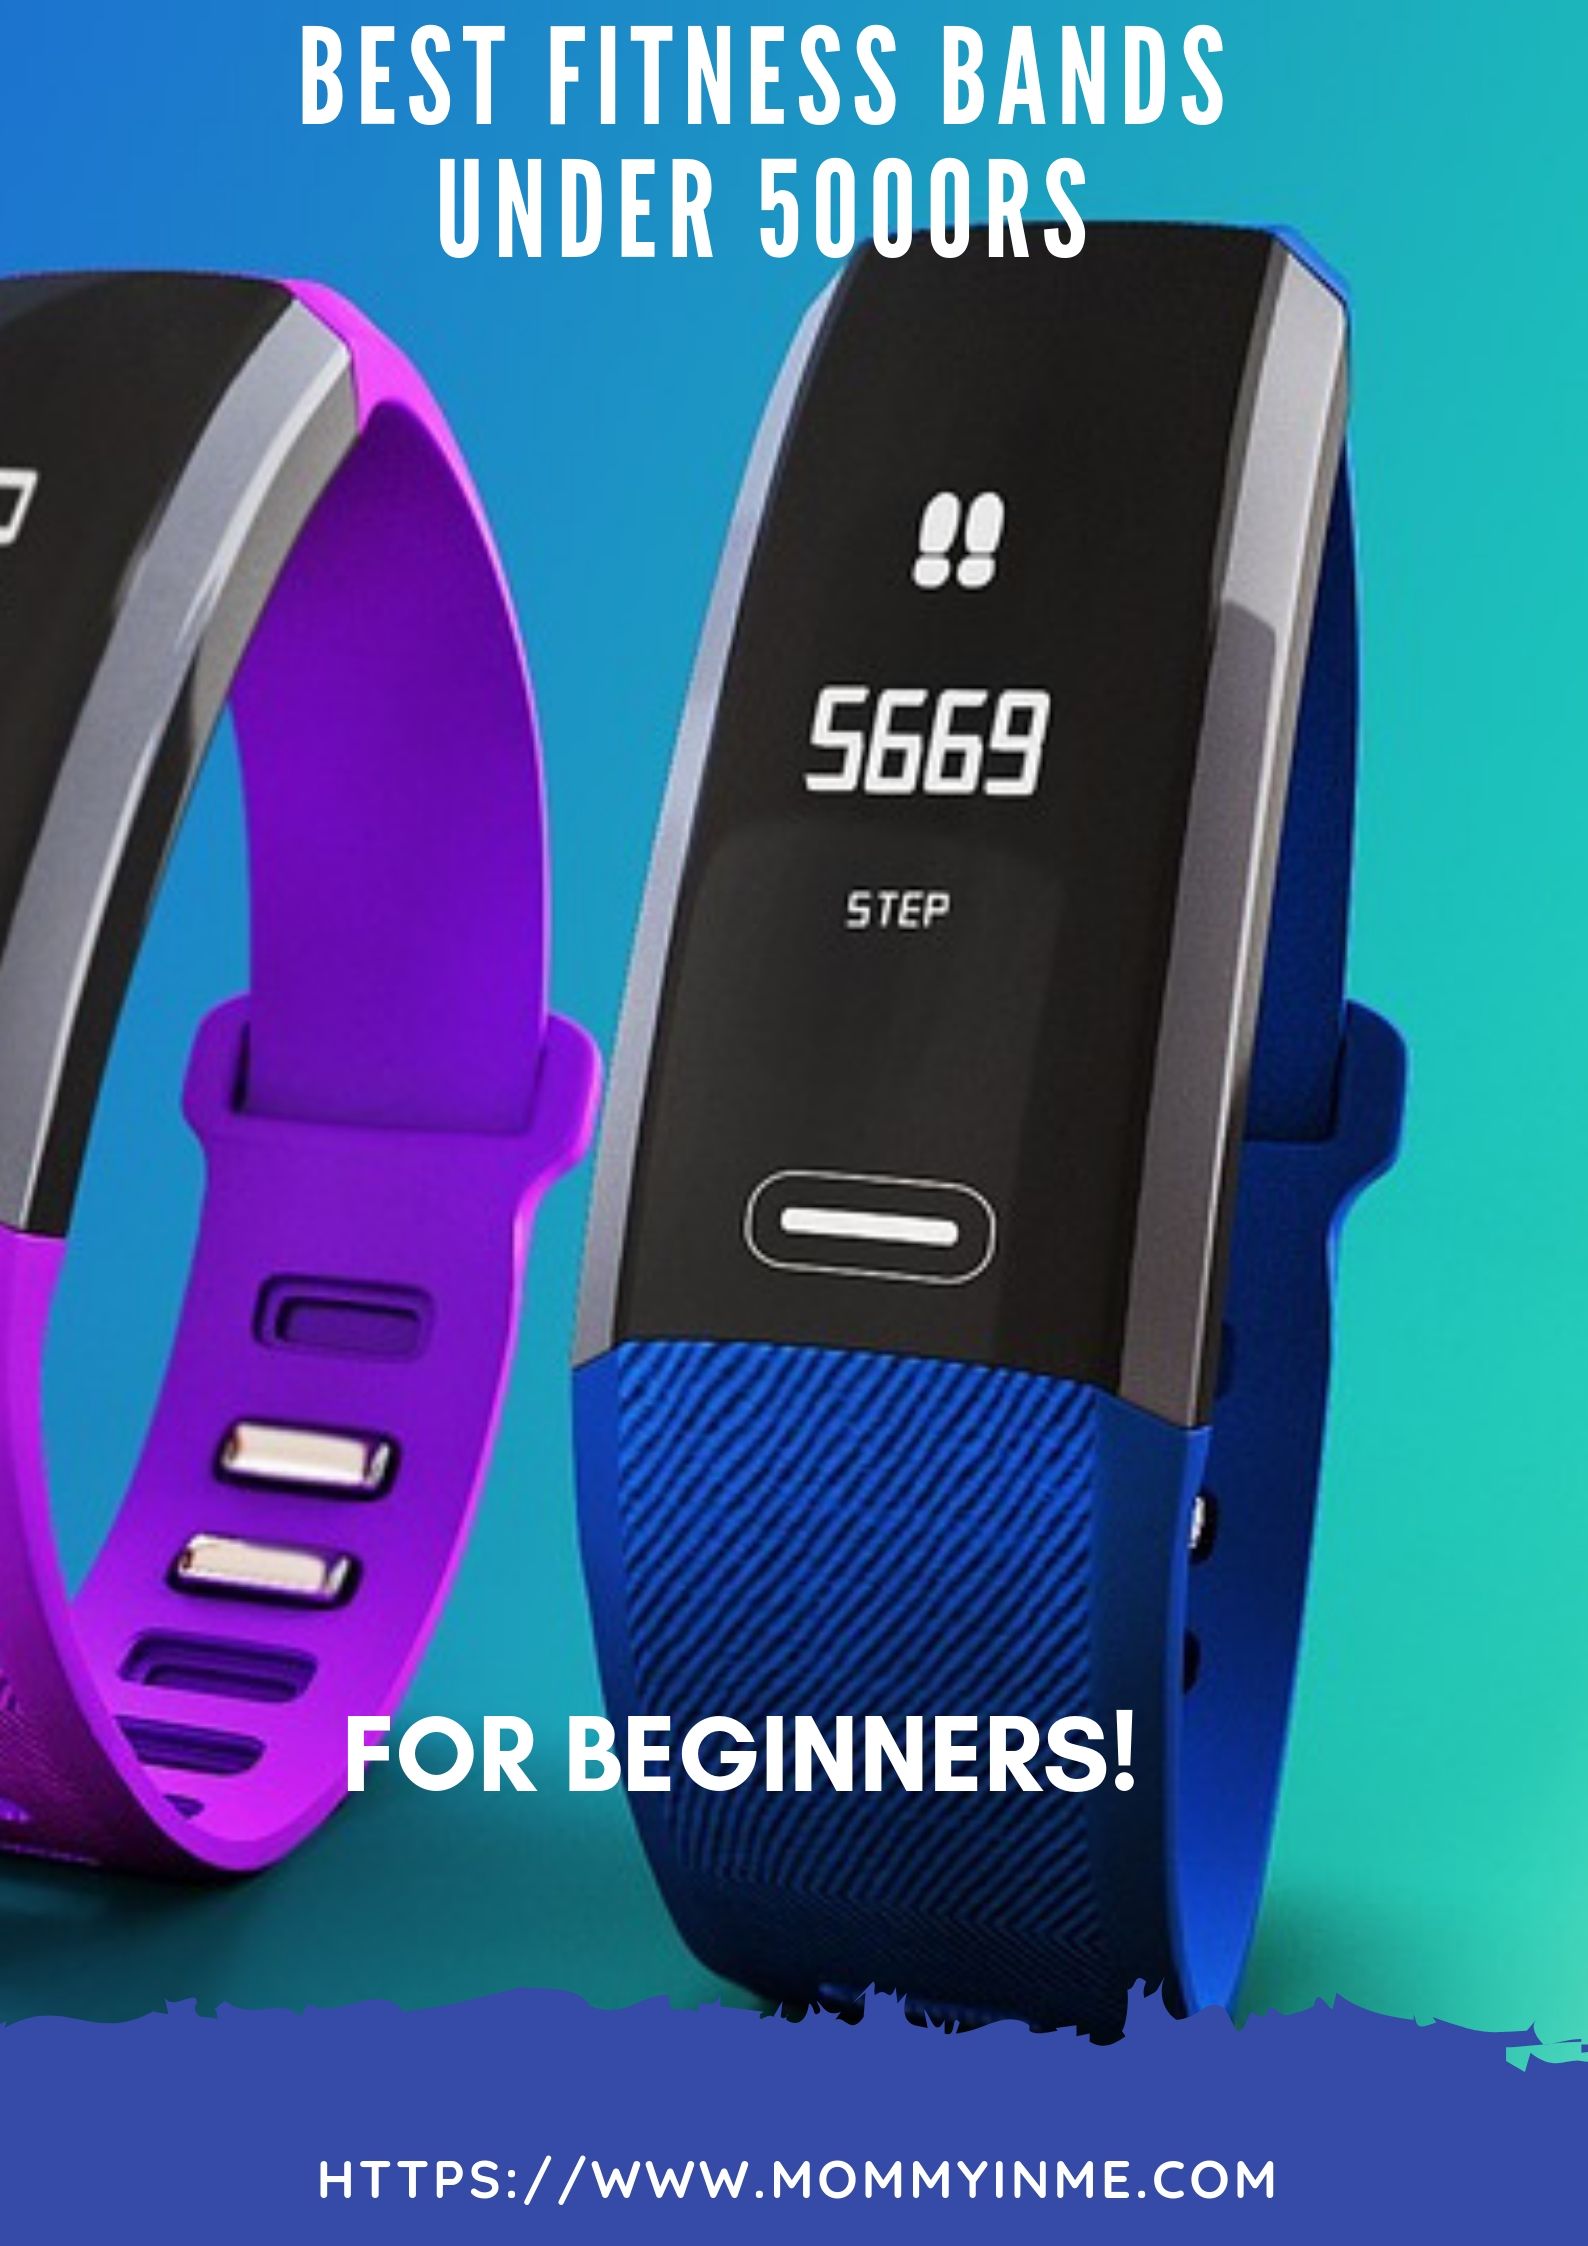 Fitness bands are essential to help us track our activity levels. And what better than to invest in best fitness bands under 5000 Rs as a beginner? Read more about Best Fitness watches and bands for women with Heart rate monitoring. #Fitnessbands #fitnesstracker #fitnessgoals #Mibands #MIband4 #Honorband4 #Fitbit #GarminVivoFit #Garminband #LenovoCardio2 